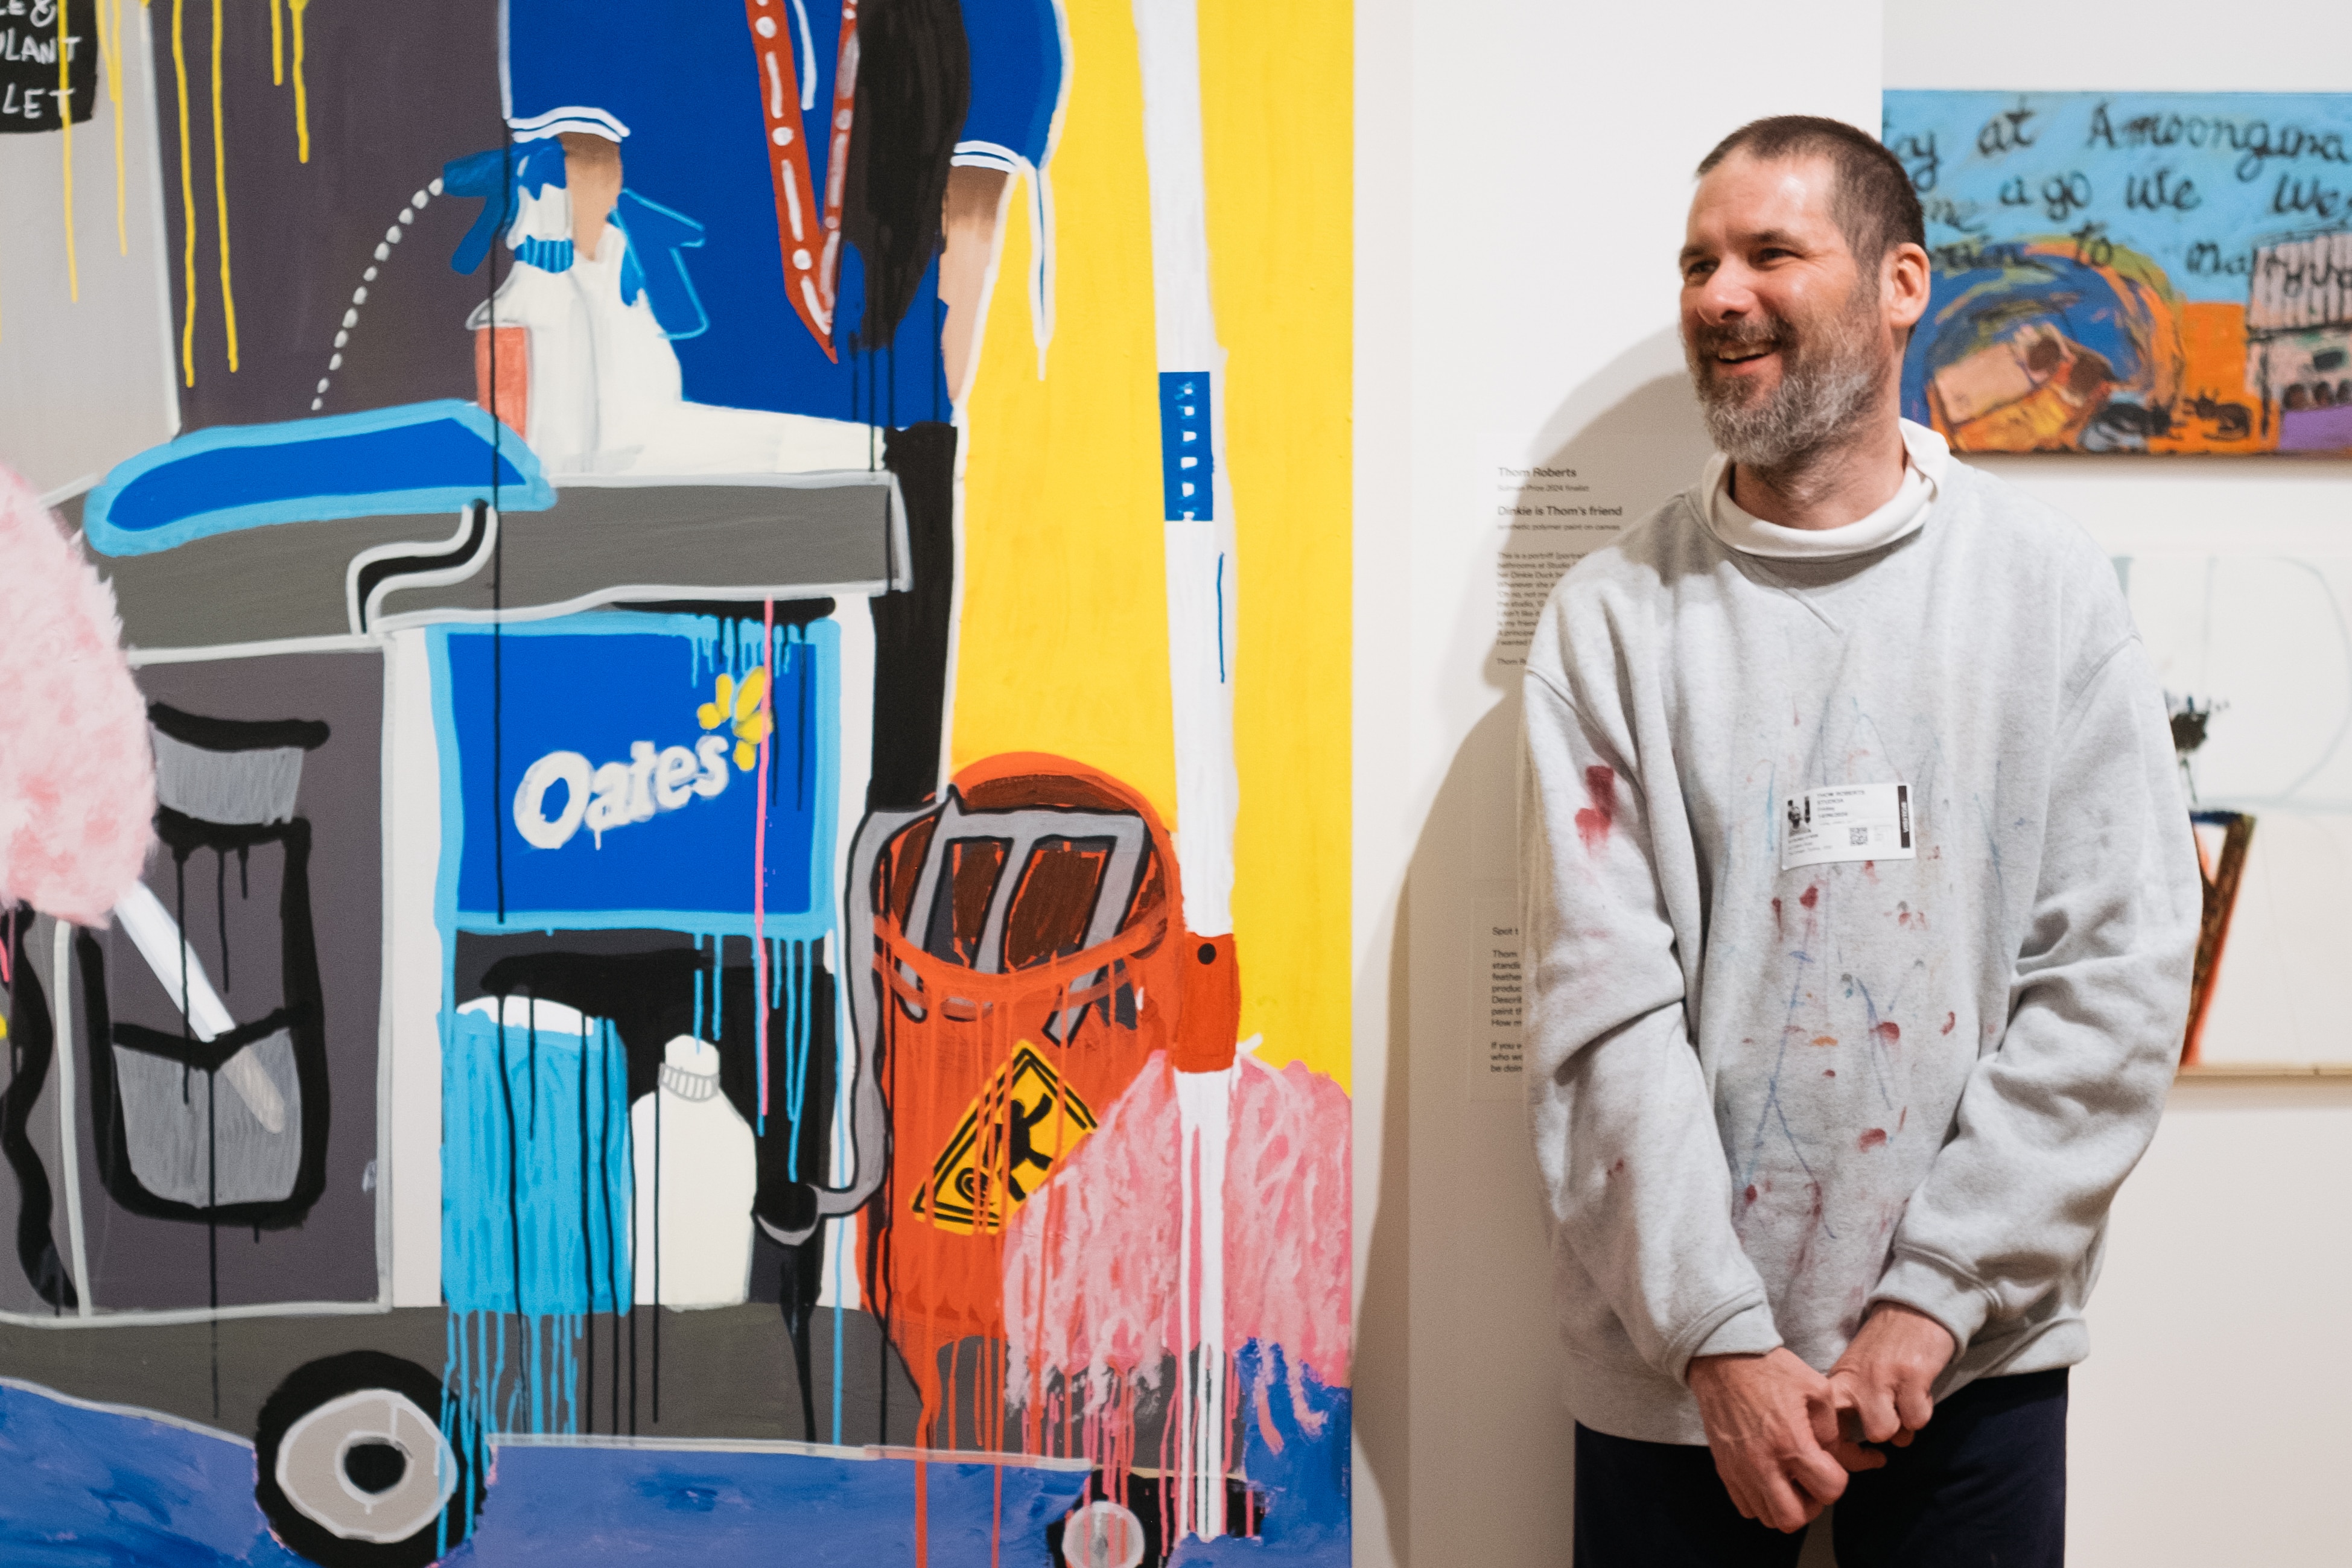 The artist wears a grey jumper covered in paint, and has save brown and grey hair. He stands smiling in AGNSW next to paintings